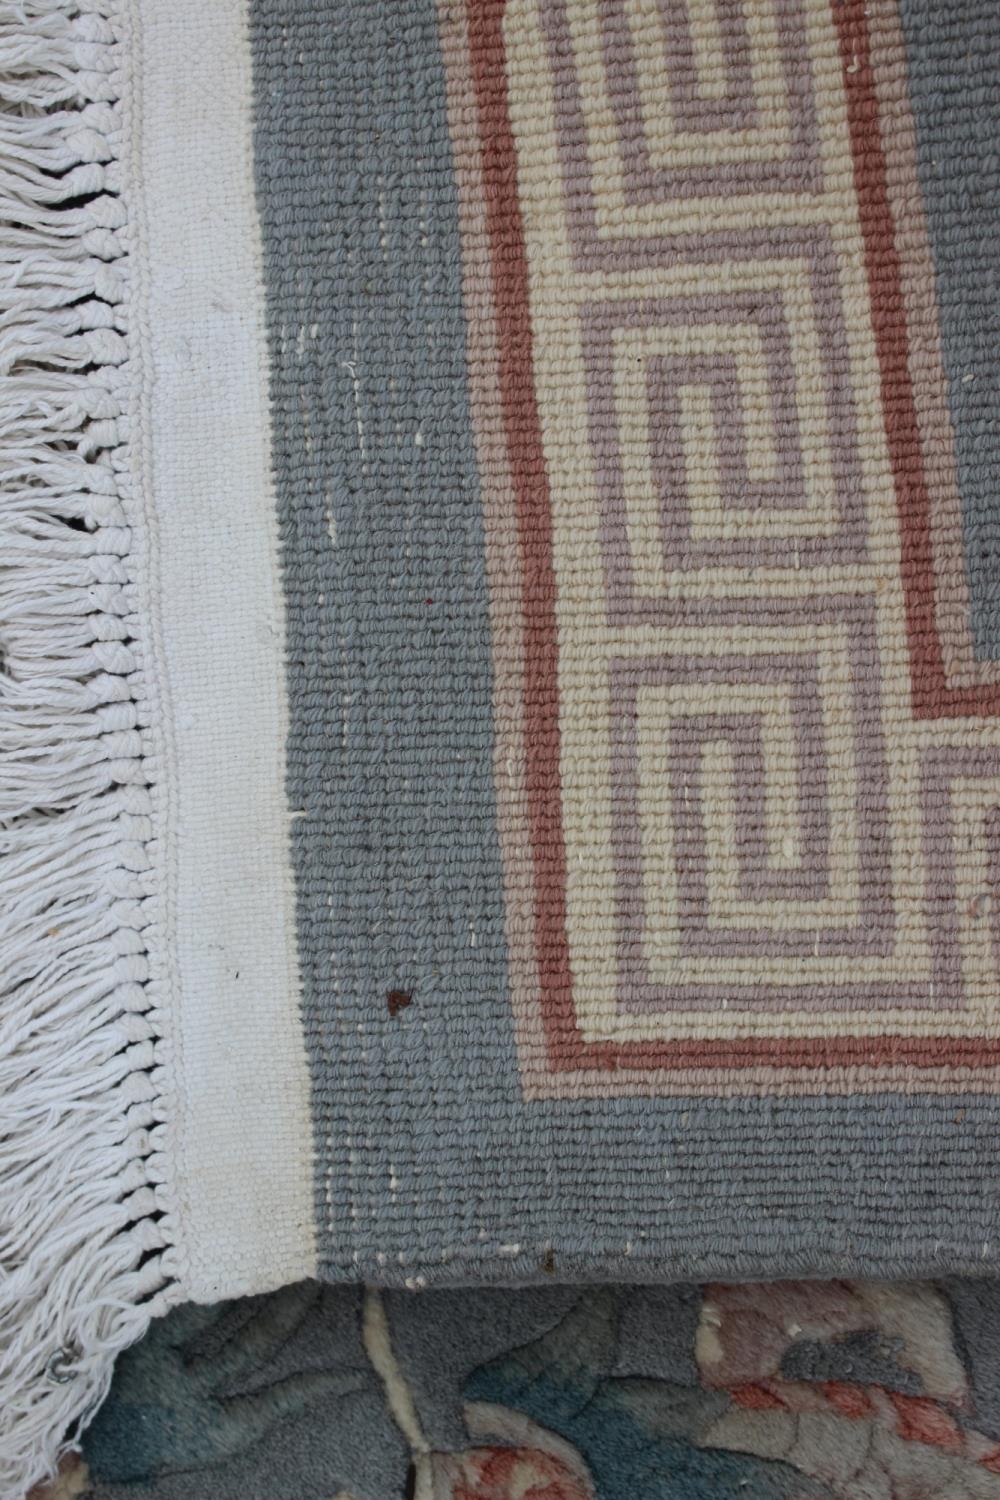 A Chinese contour pile rug with dragon design on a grey ground, 75" x 49" - Image 3 of 3